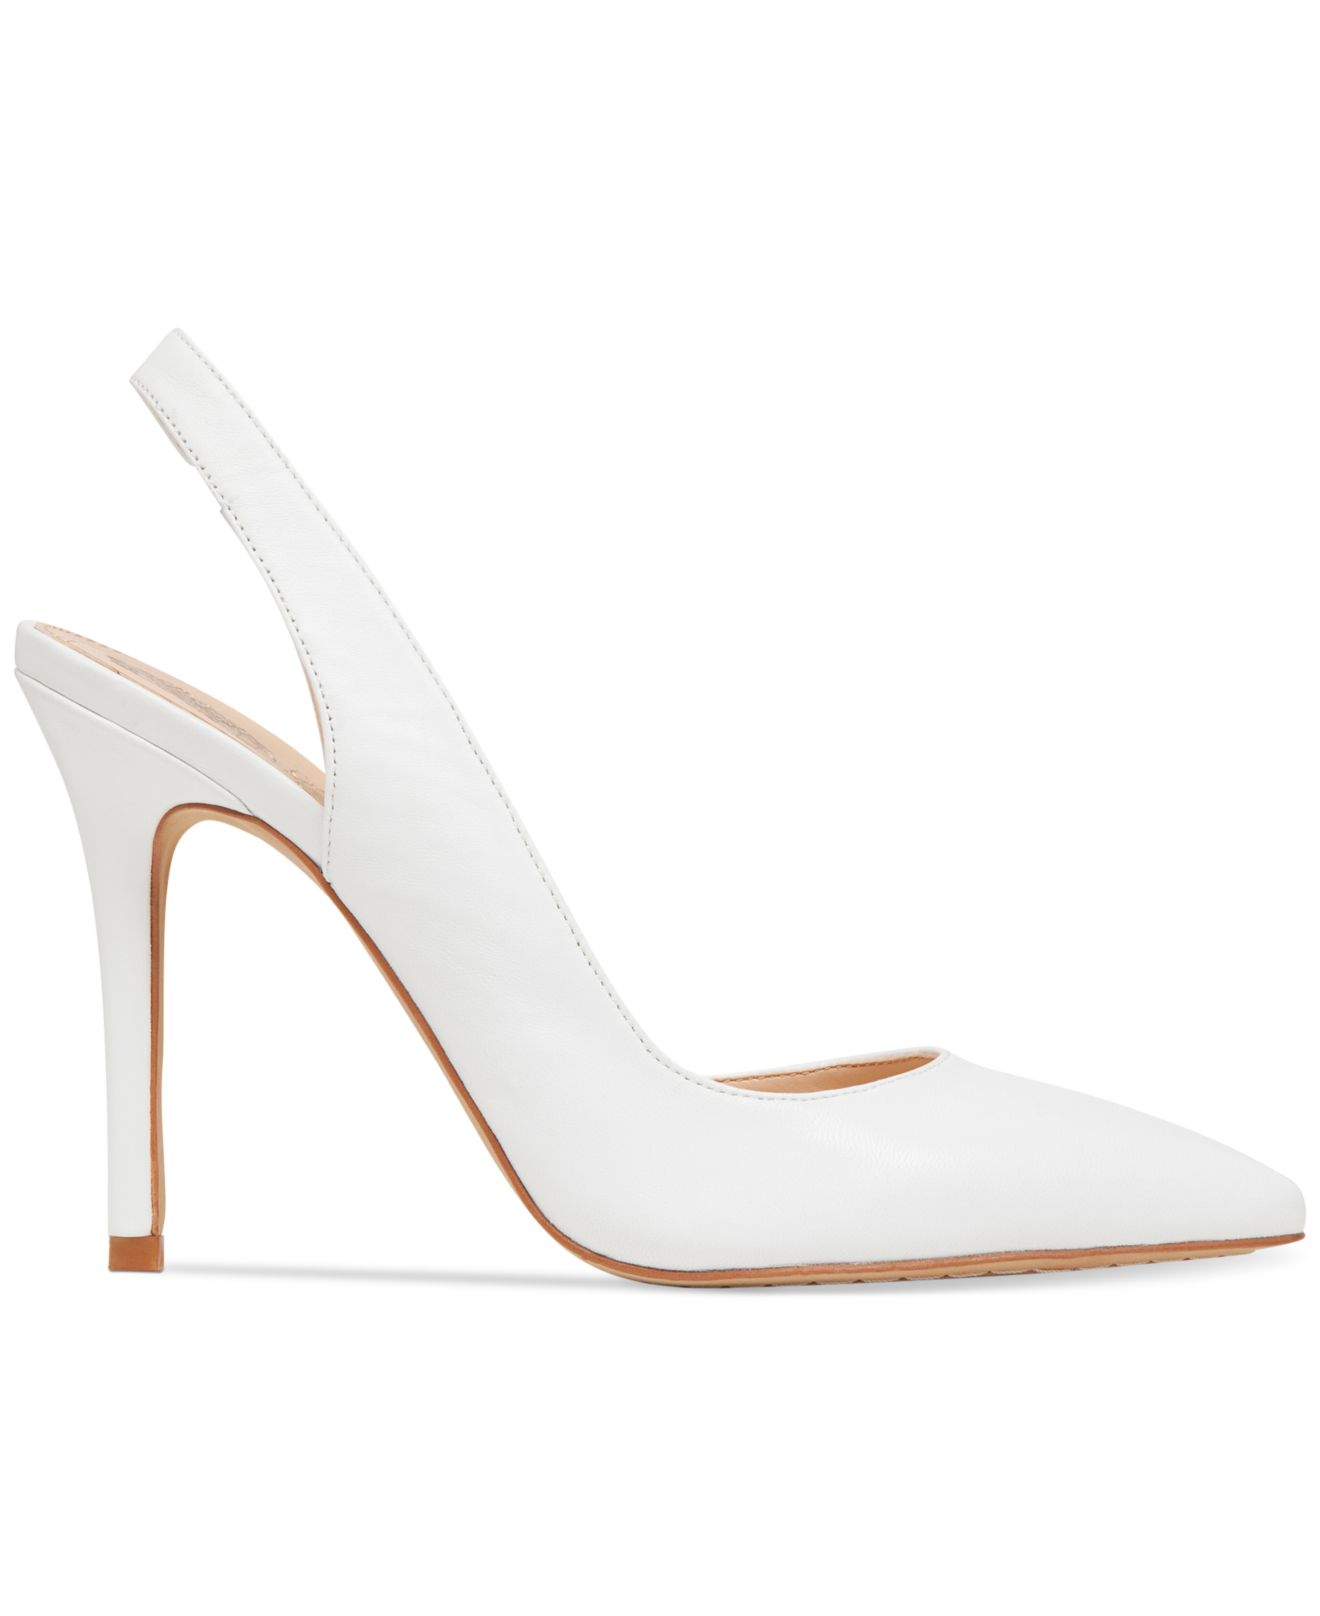 Vince Camuto Sassa Slingback Pumps in White - Lyst